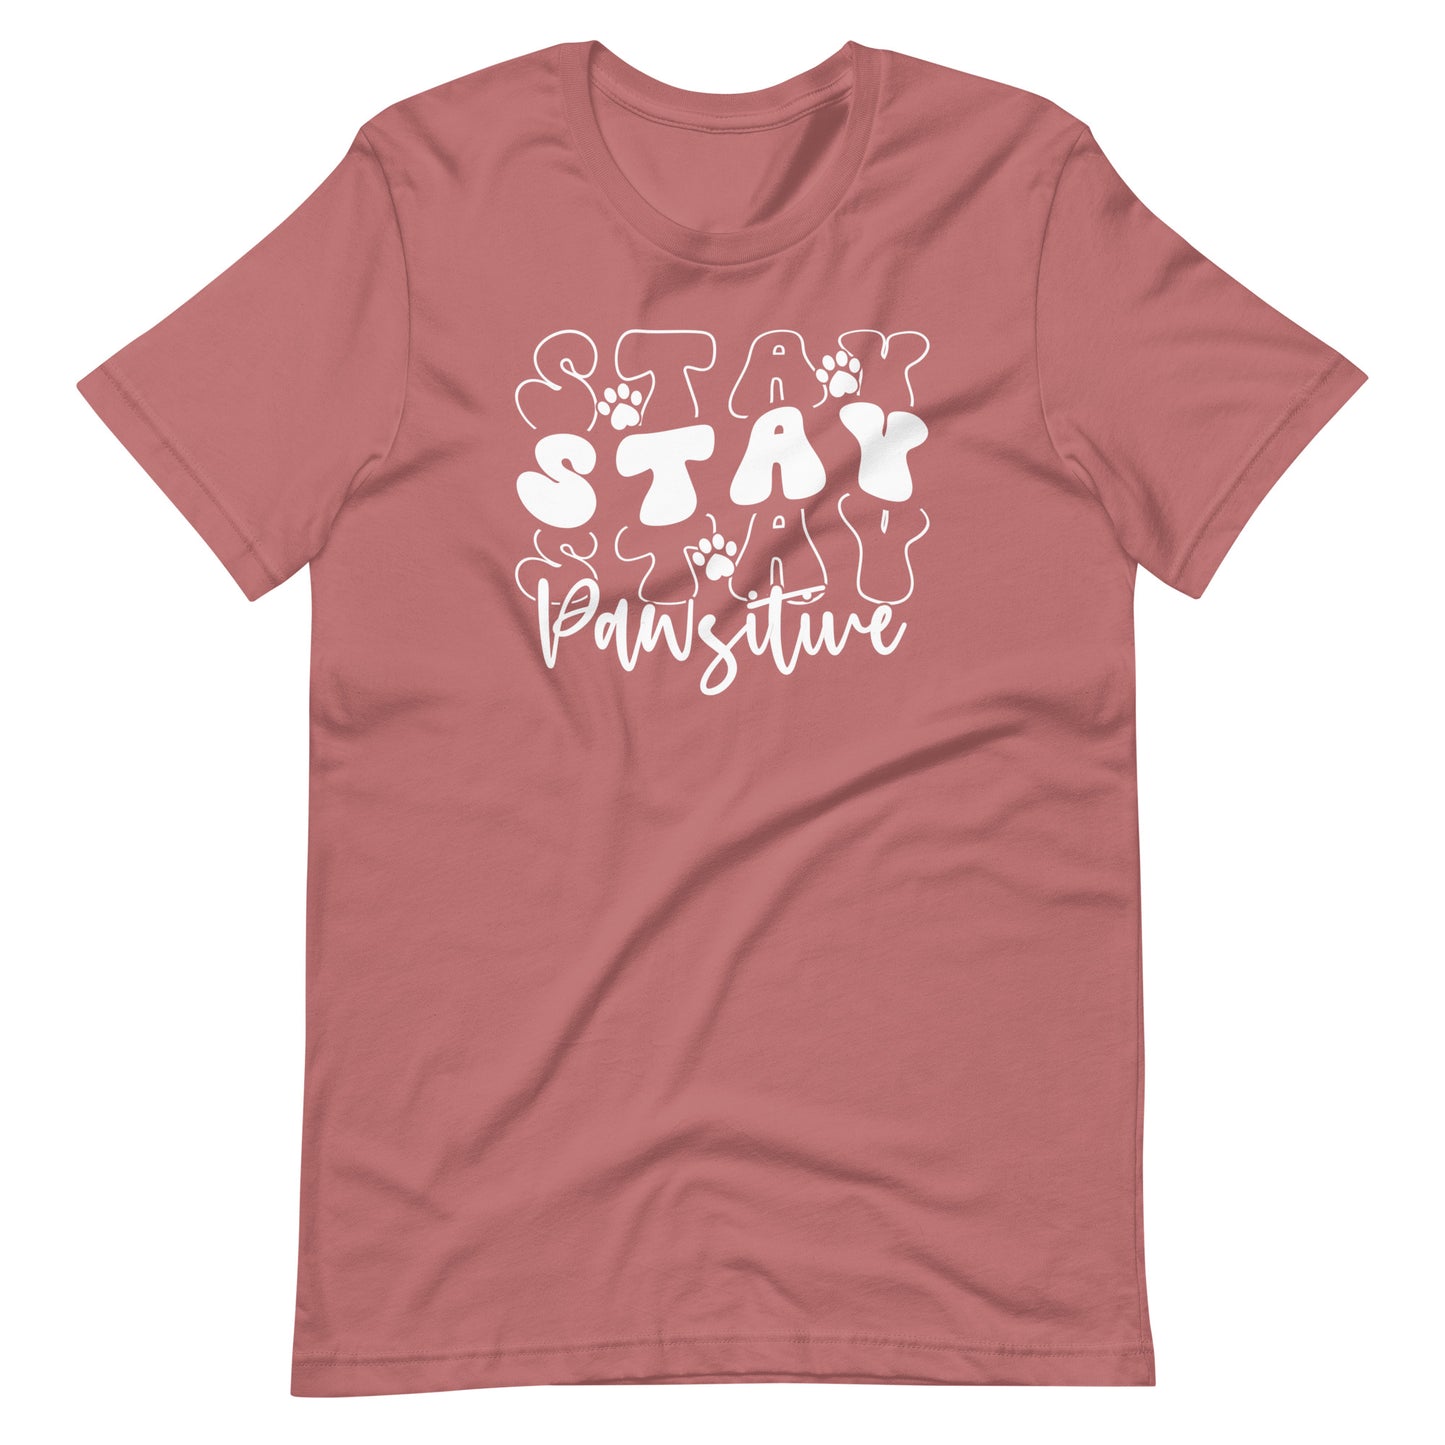 Stay Stay Stay Pawsitive T-Shirt